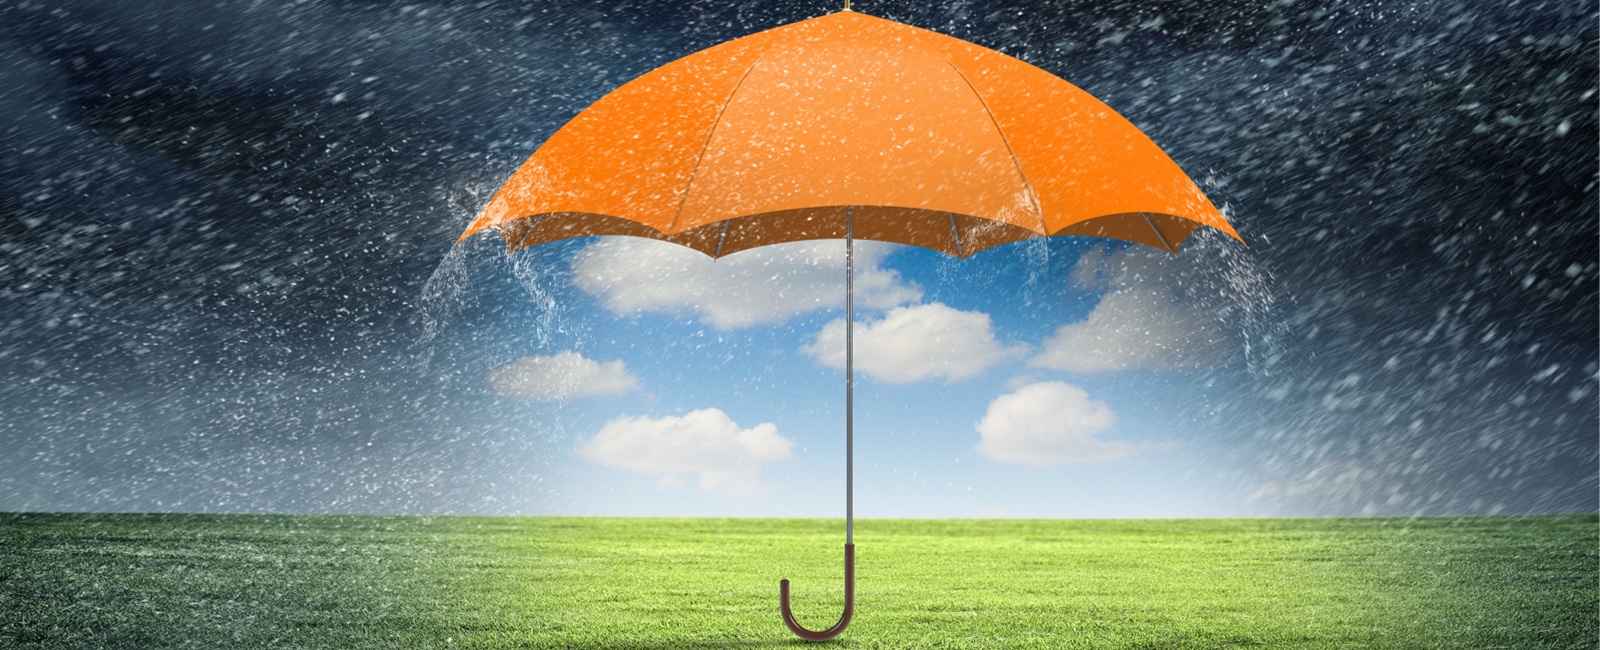 Weathering the Storm: Targeted and Timely Analytics to Support Disengaged Students